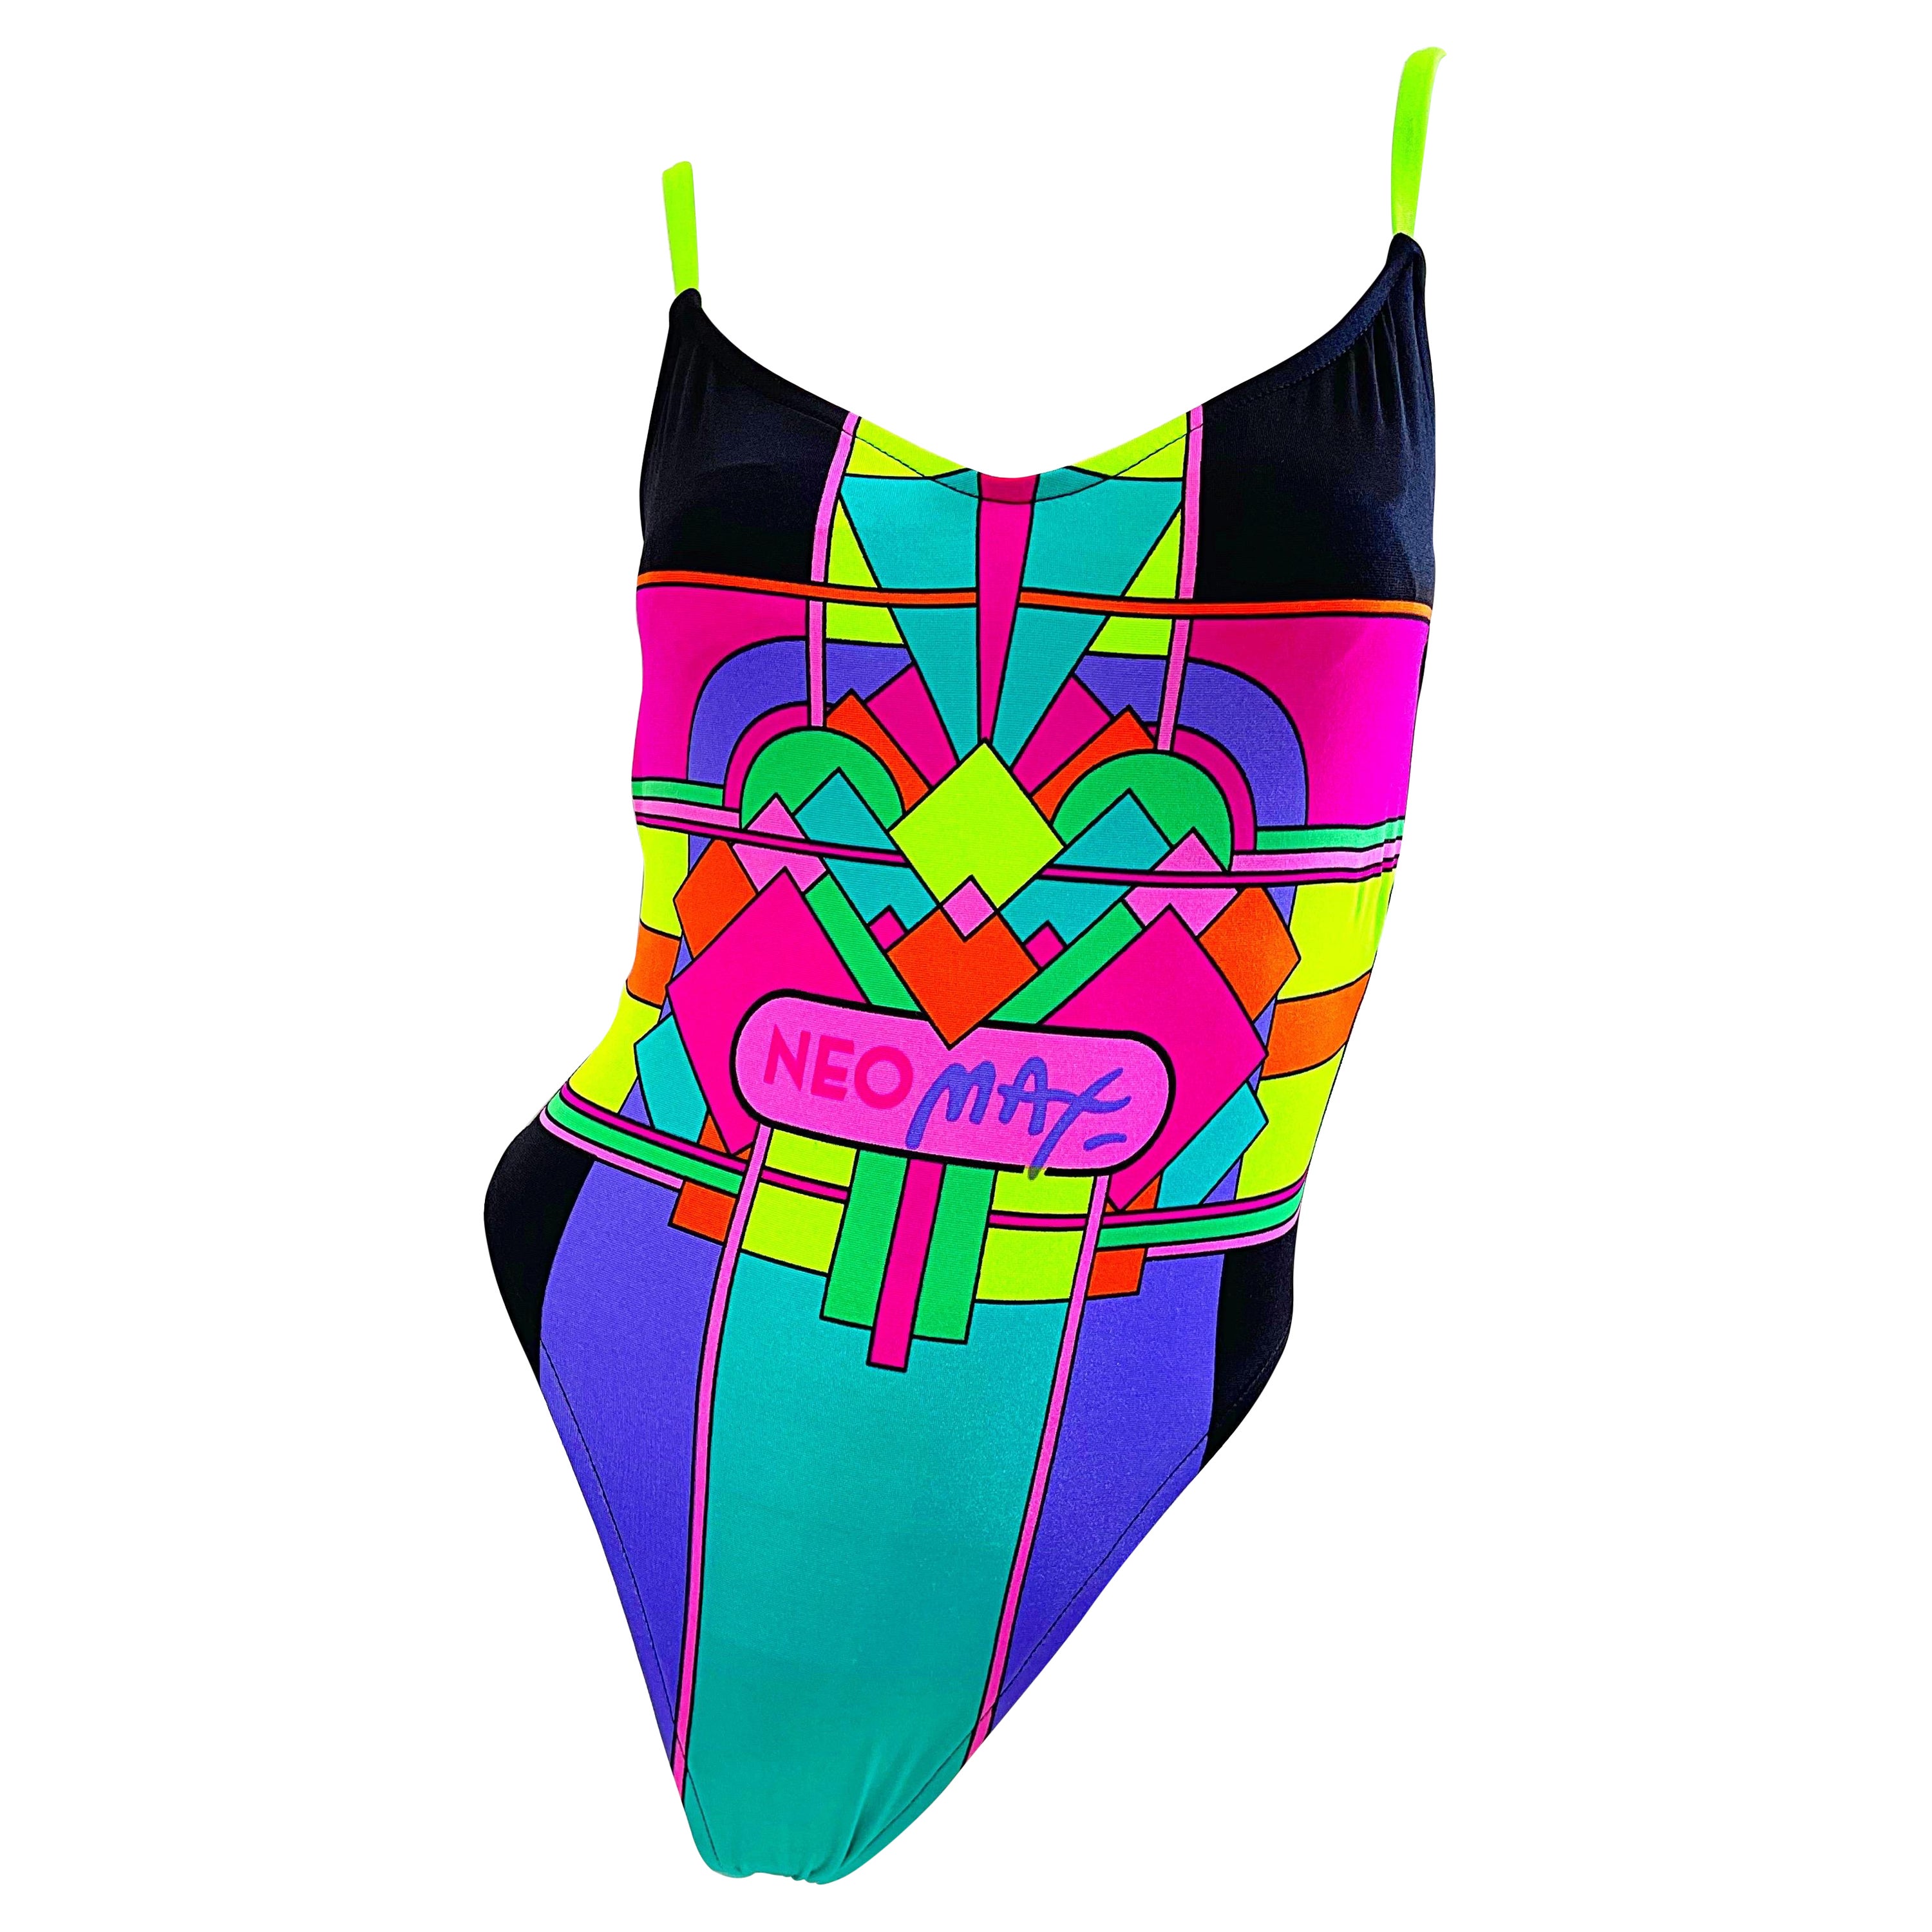 NWT 1980s Peter Max Neomax Neon Abstract Art Print One Piece Swimsuit Bodysuit